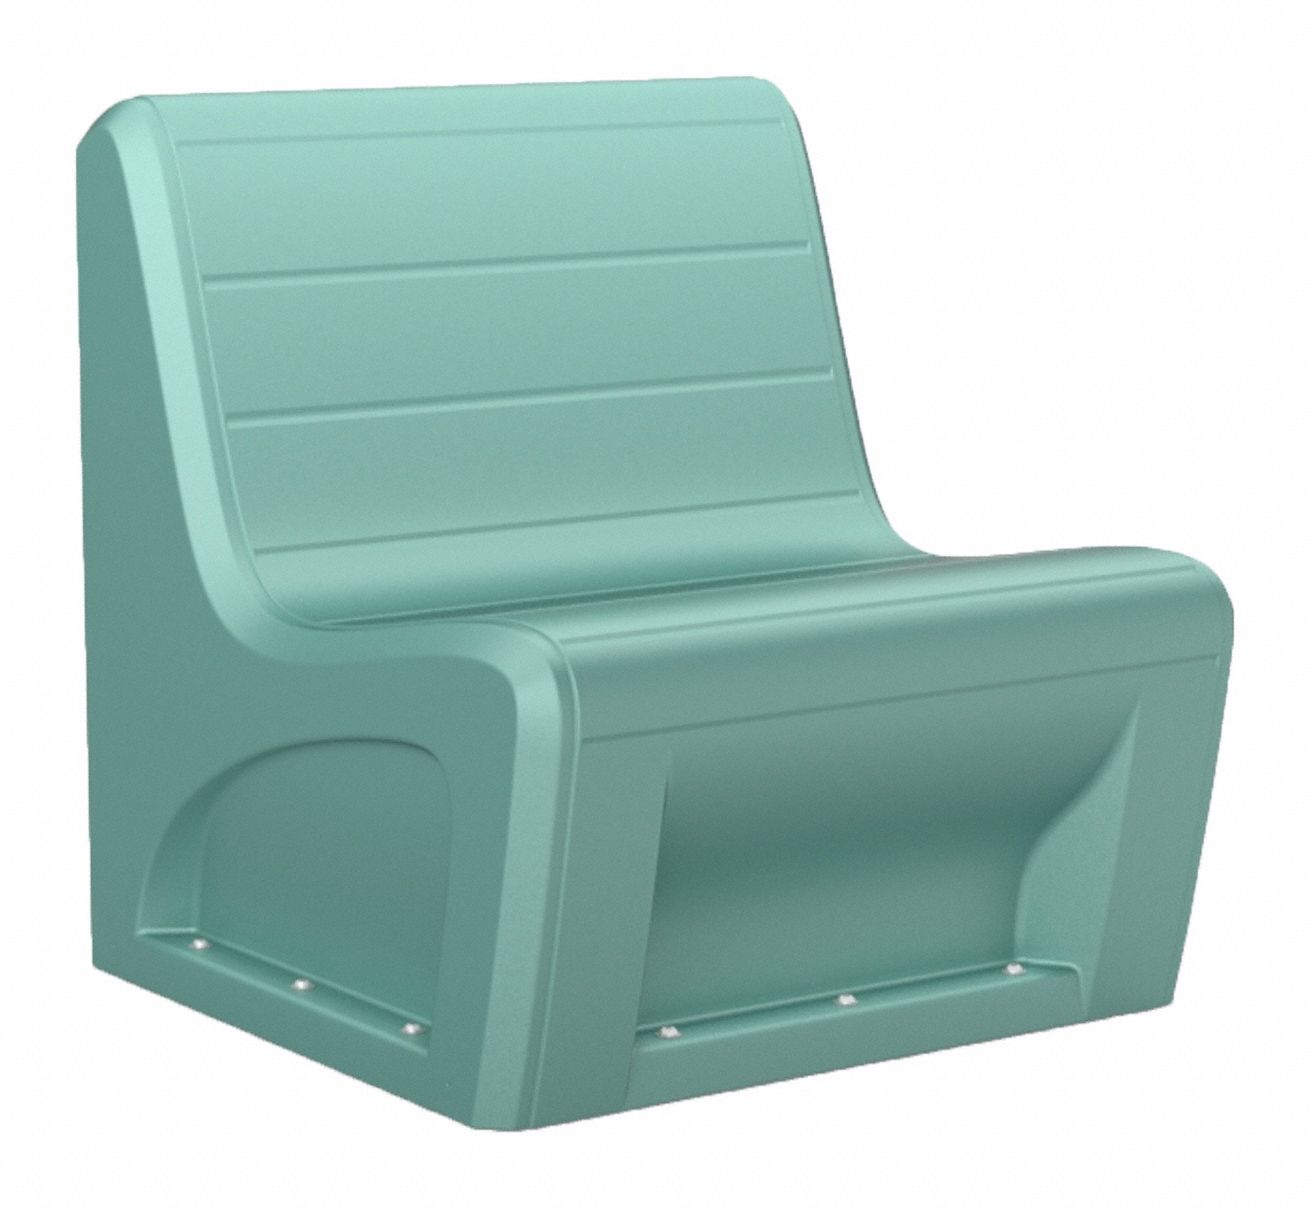 Sabre Sectional Chair w/Sand Port Aqua: 30 1/2 in Wd, 32 in Lg, 33 in Ht, 500 lb Wt Capacity